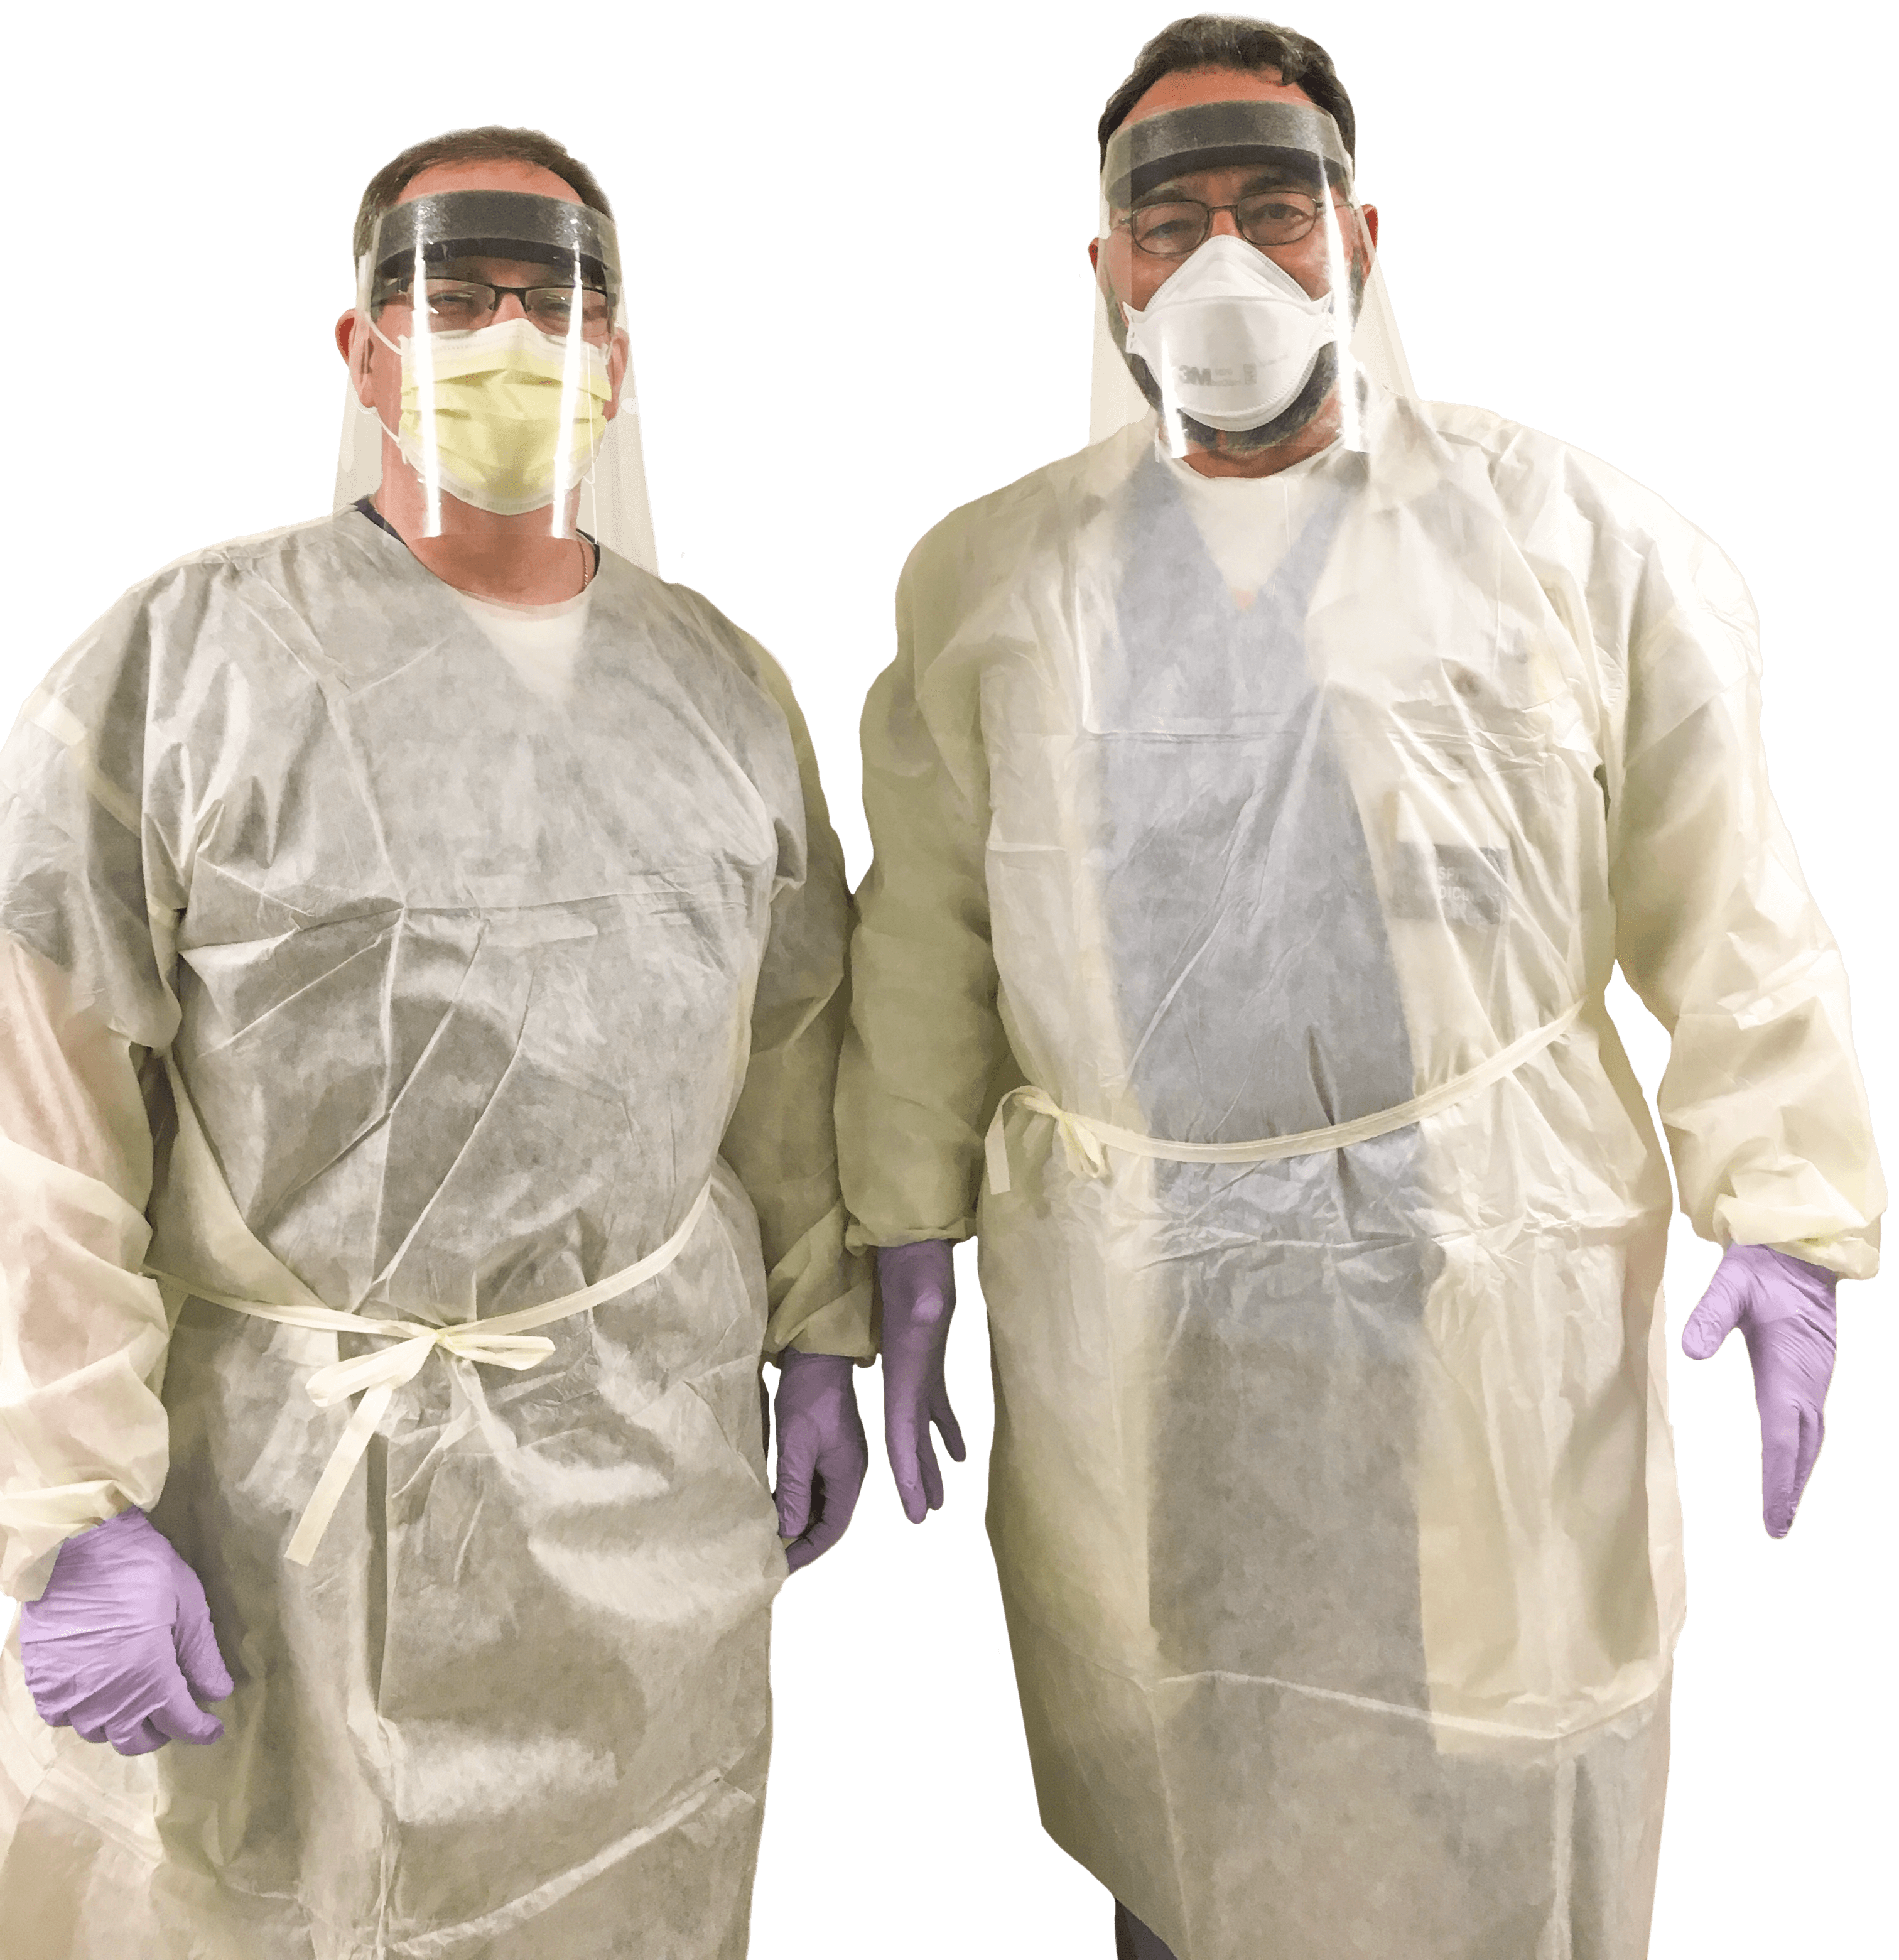 Laszlo Madaras (right) and a colleague at the height of the pandemic in full personal protective equipment. While he no longer dons full PPE while seeing patients, he says clinicians can reduce the spread of infection by wearing a respirator.